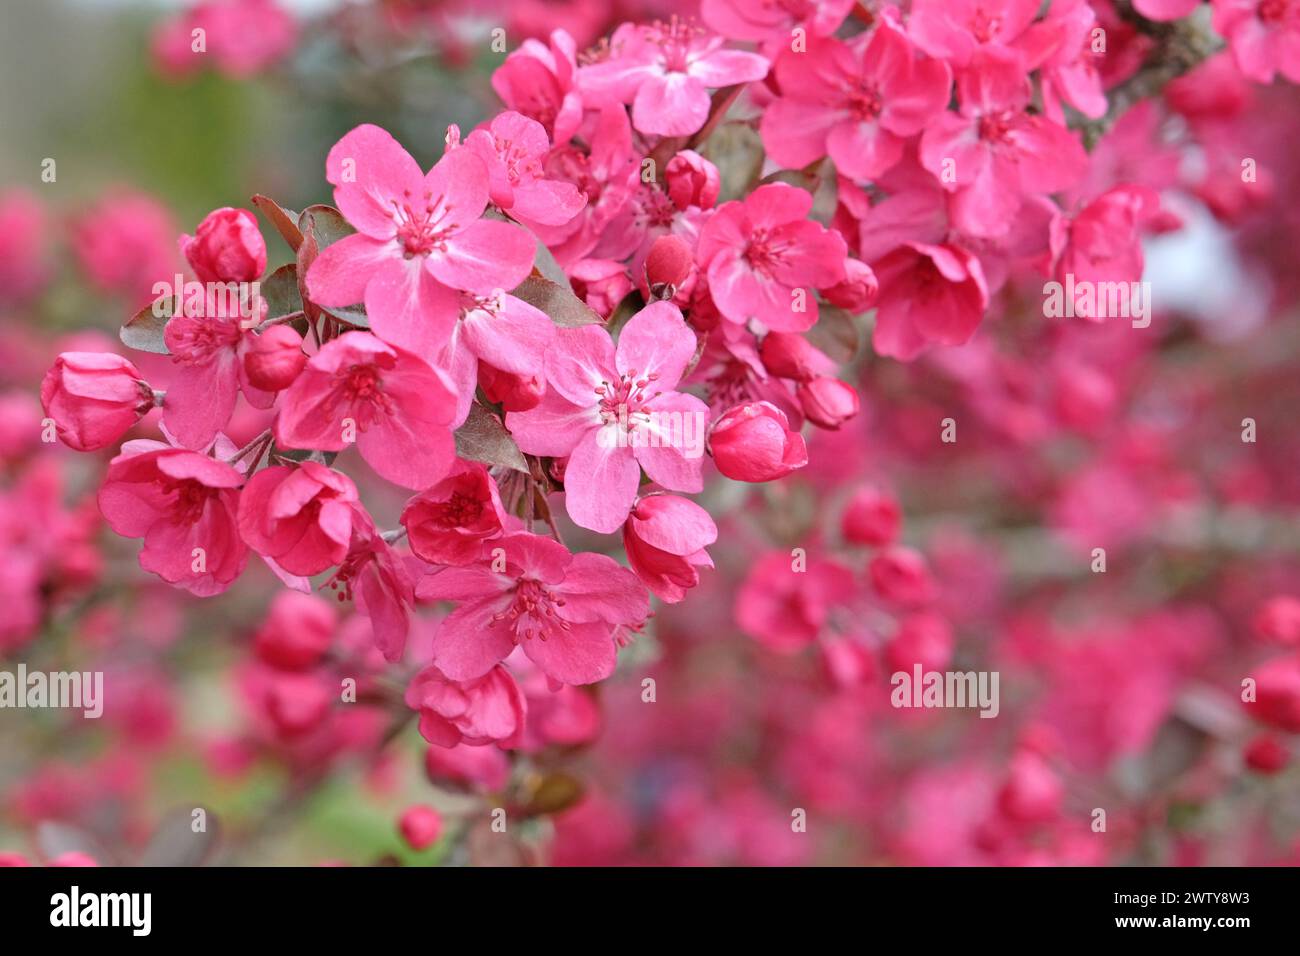 Malus Cardinal, or the pink crab apple tree, in flower. Stock Photo